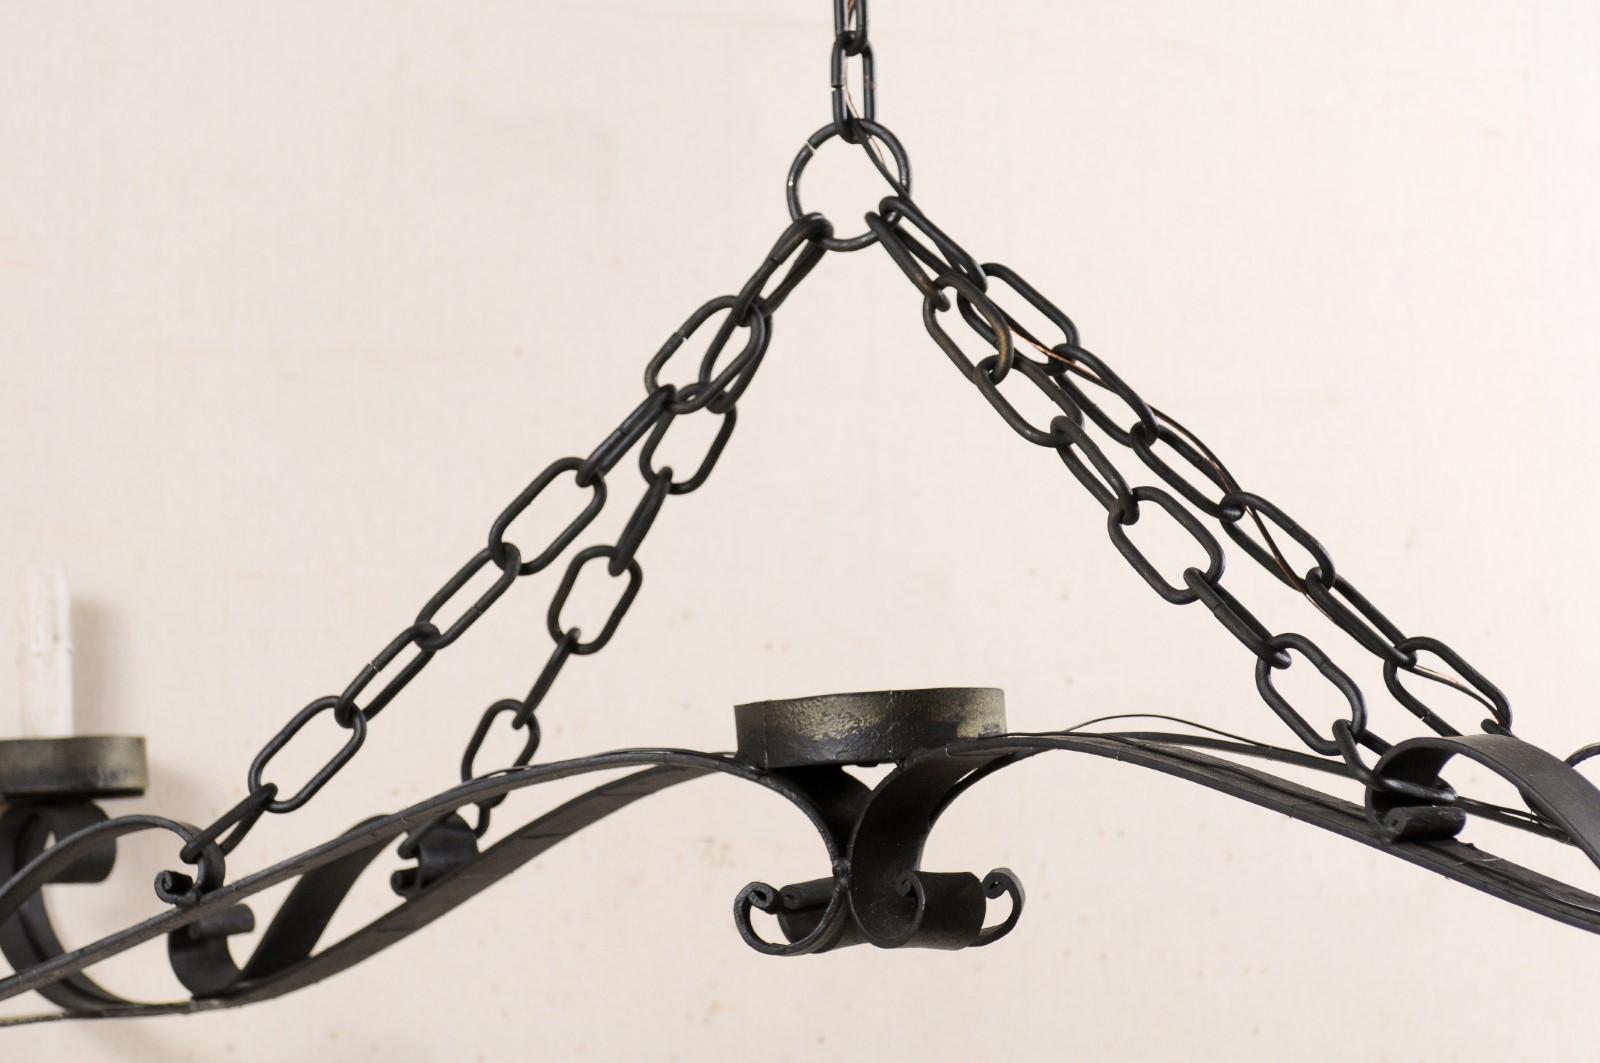 An Elegant French Wrought Iron Chandelier a Great Large Size of 5+ Ft in Length! In Good Condition In Atlanta, GA